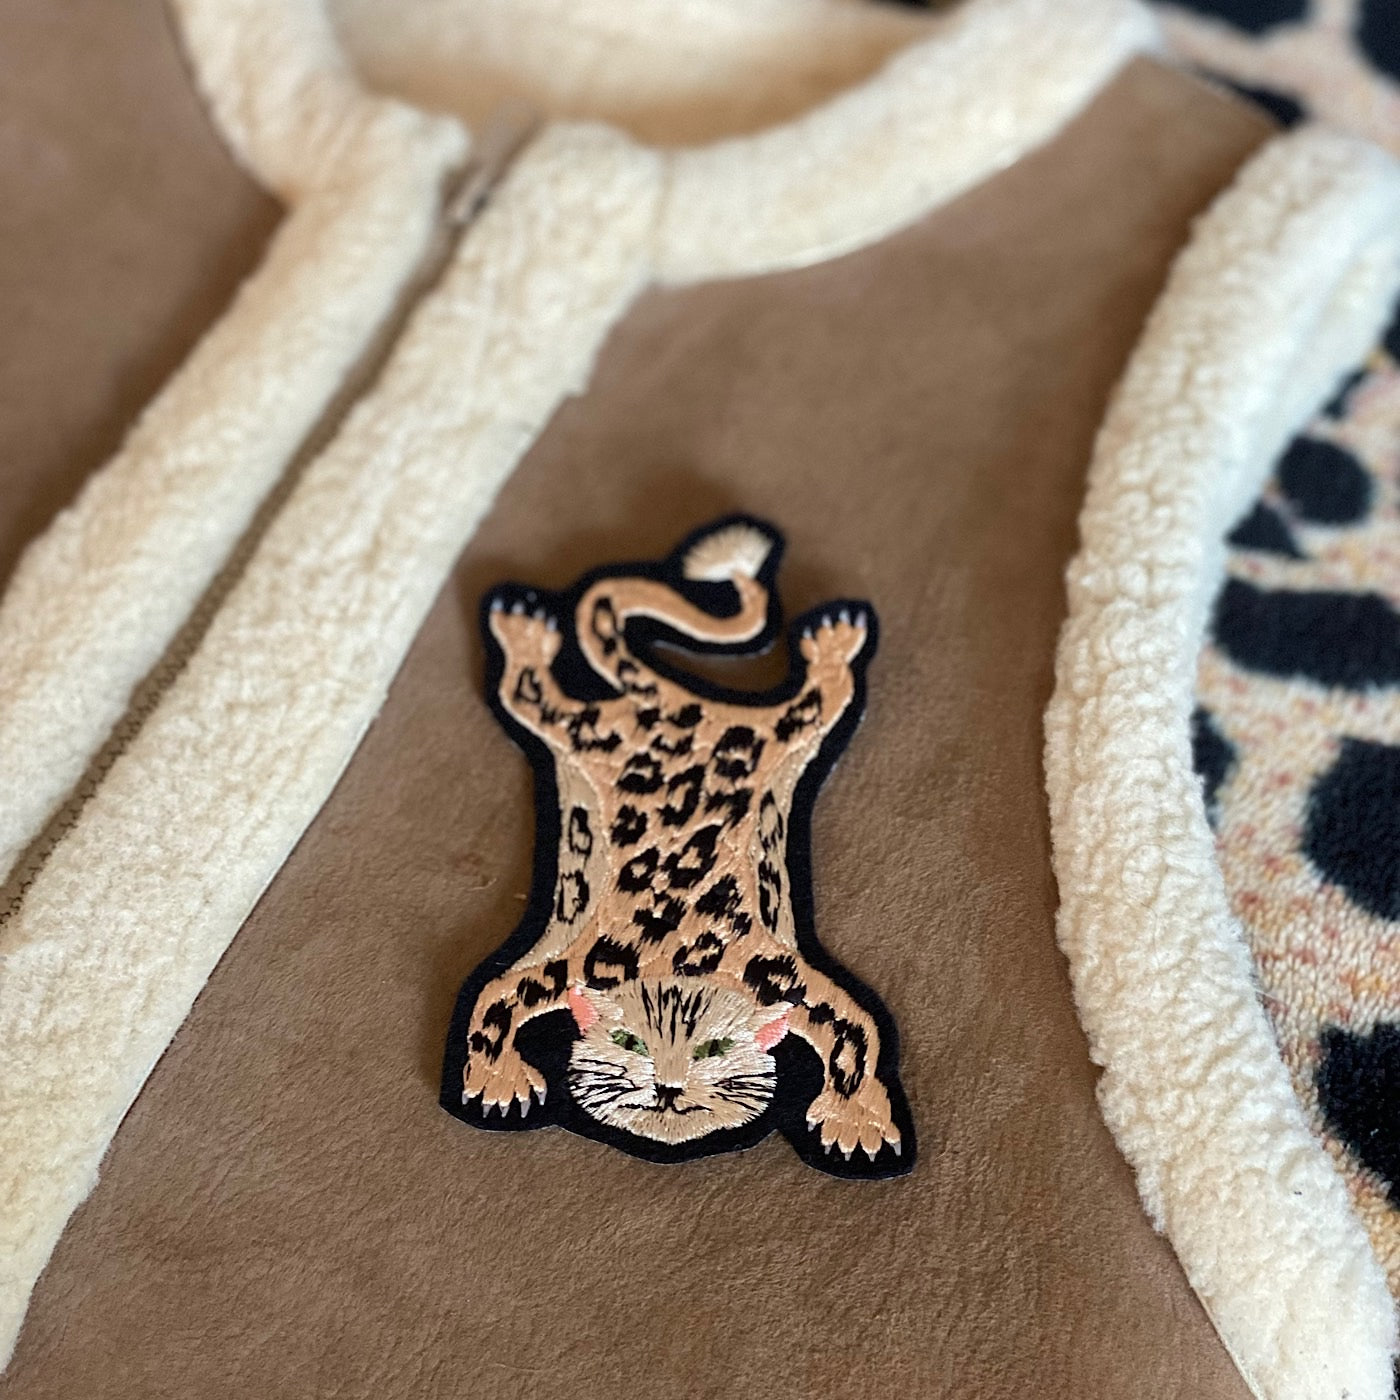 Close-up of leopard embroidered patch on item of clothing